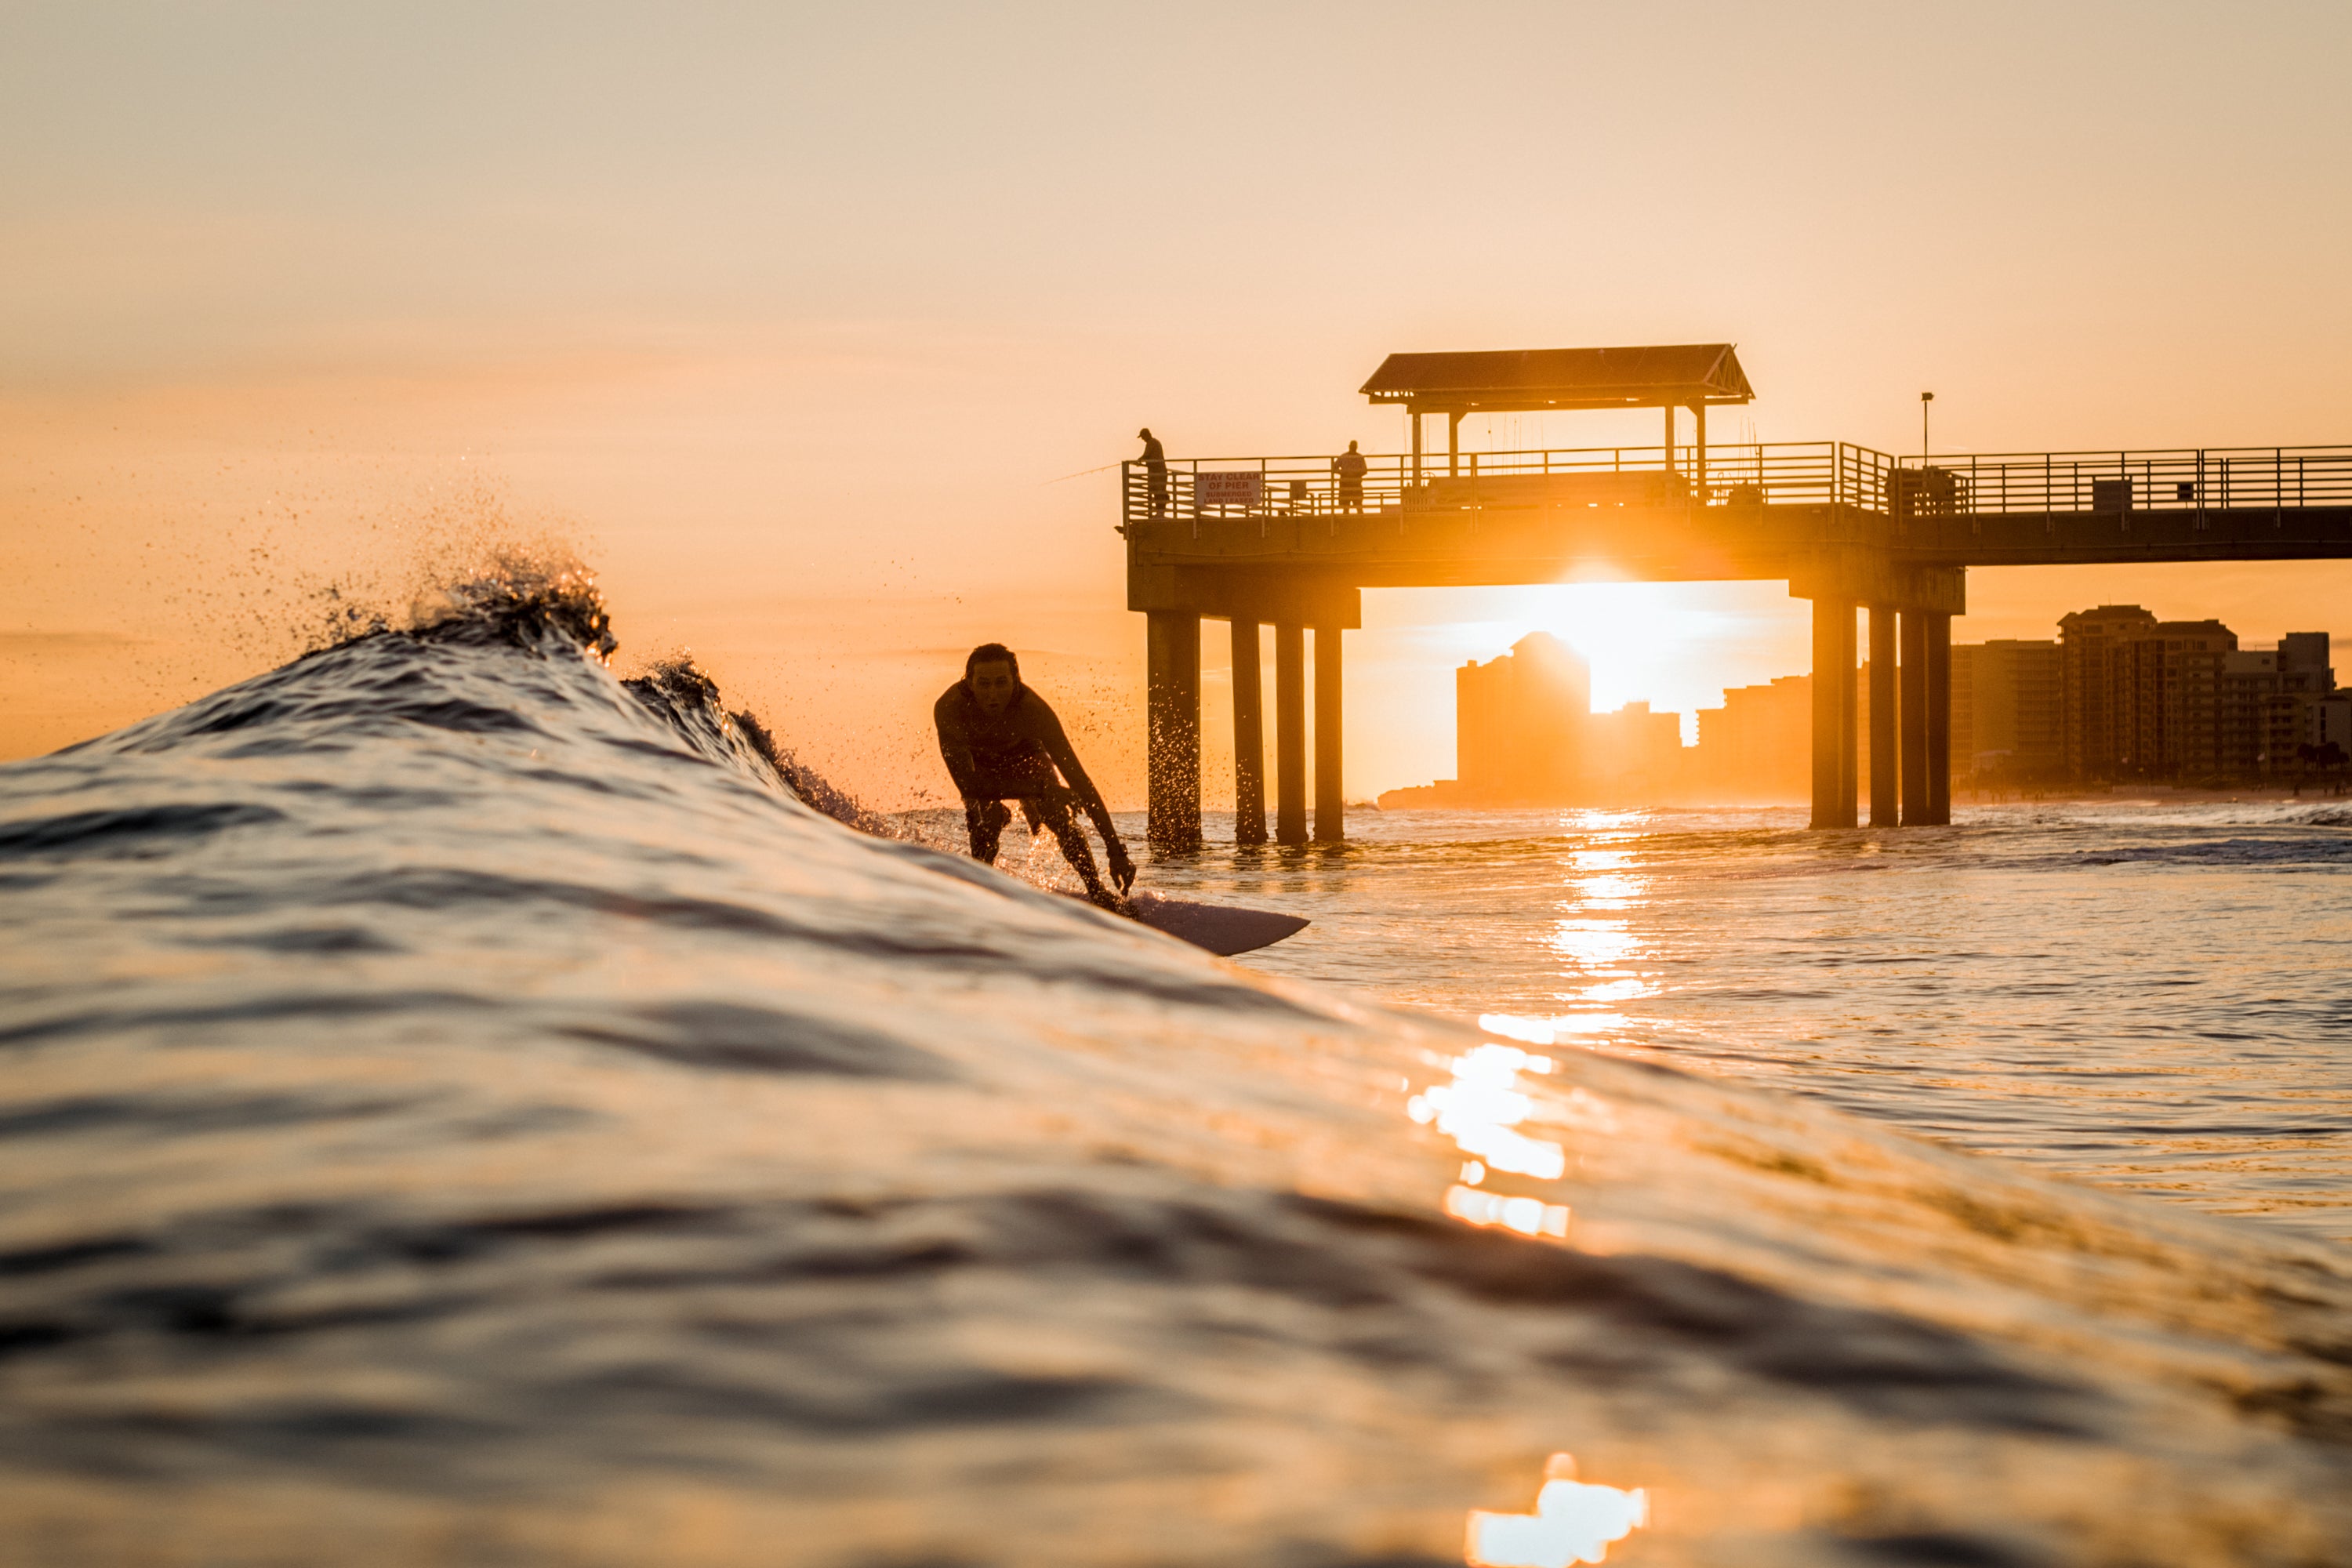 Sam Sumlin placed 3rd in the Nature-Based Activities category of the 2020 Outdoor Alabama Photo Contest with his image of a surfer (Grant Hesse) at Orange Beach, Alabama.